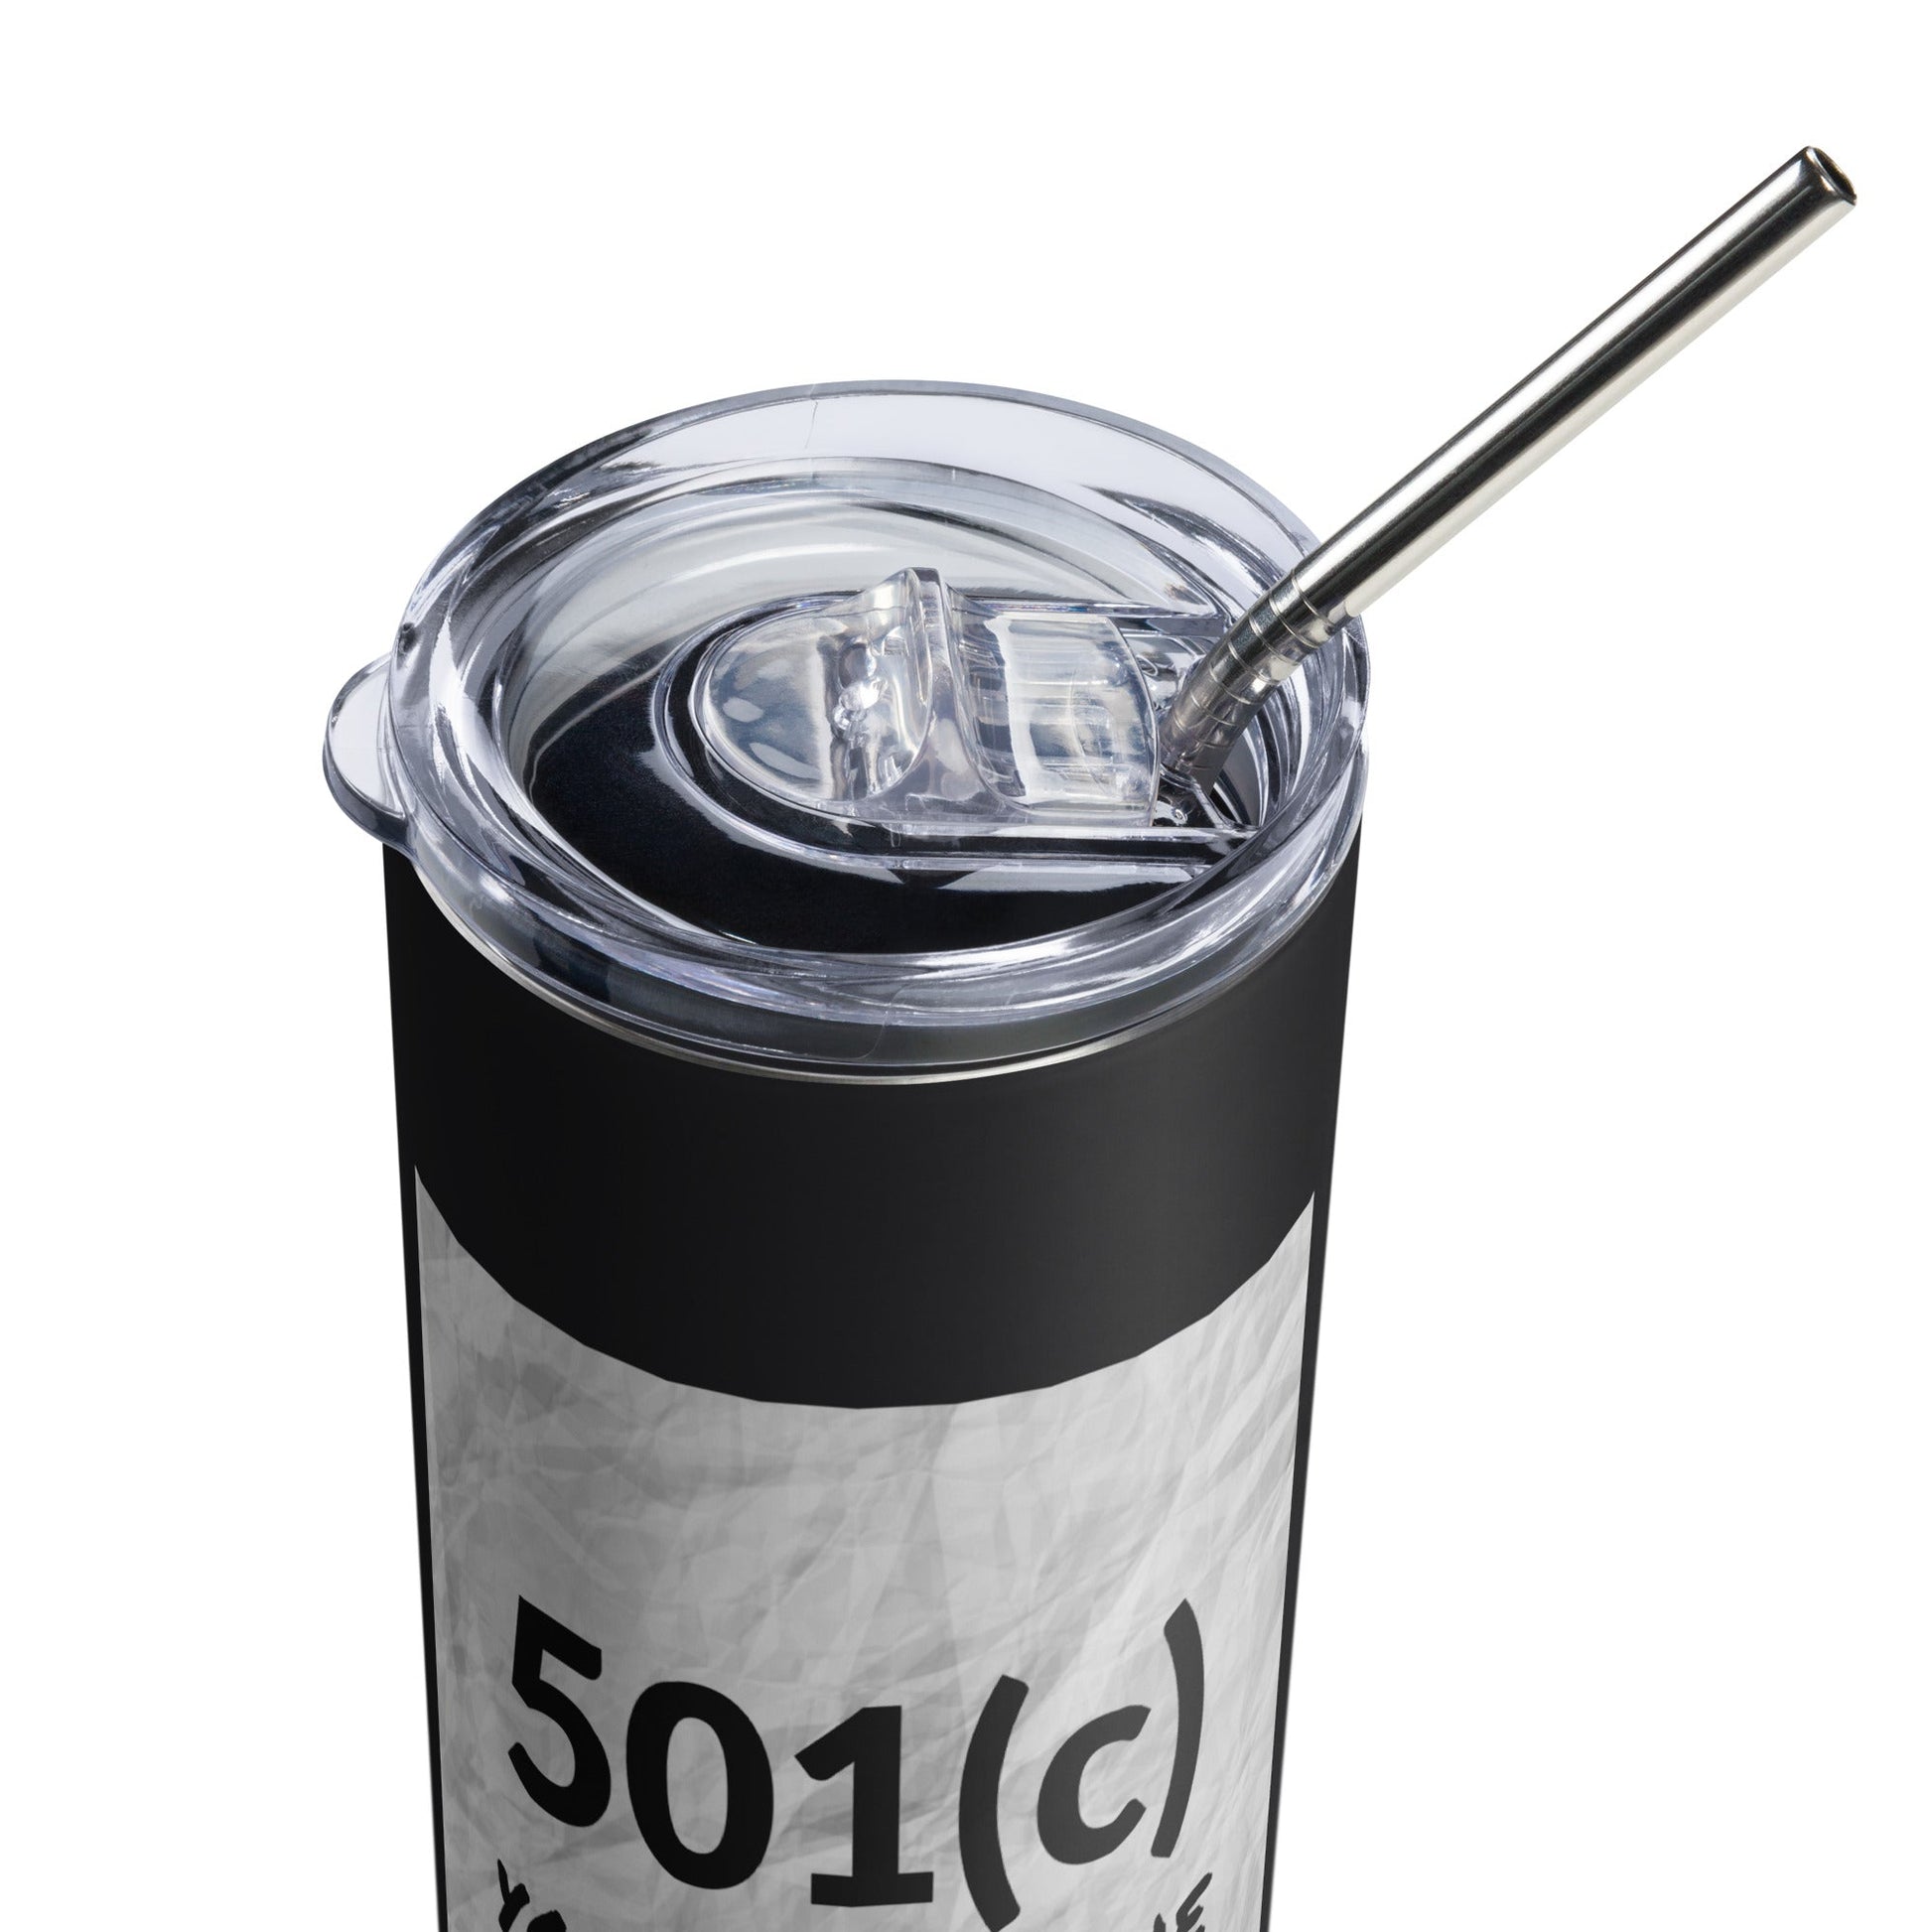 501(c) You After the Busy Season Grants Management Stainless steel tumbler-recalciGrant